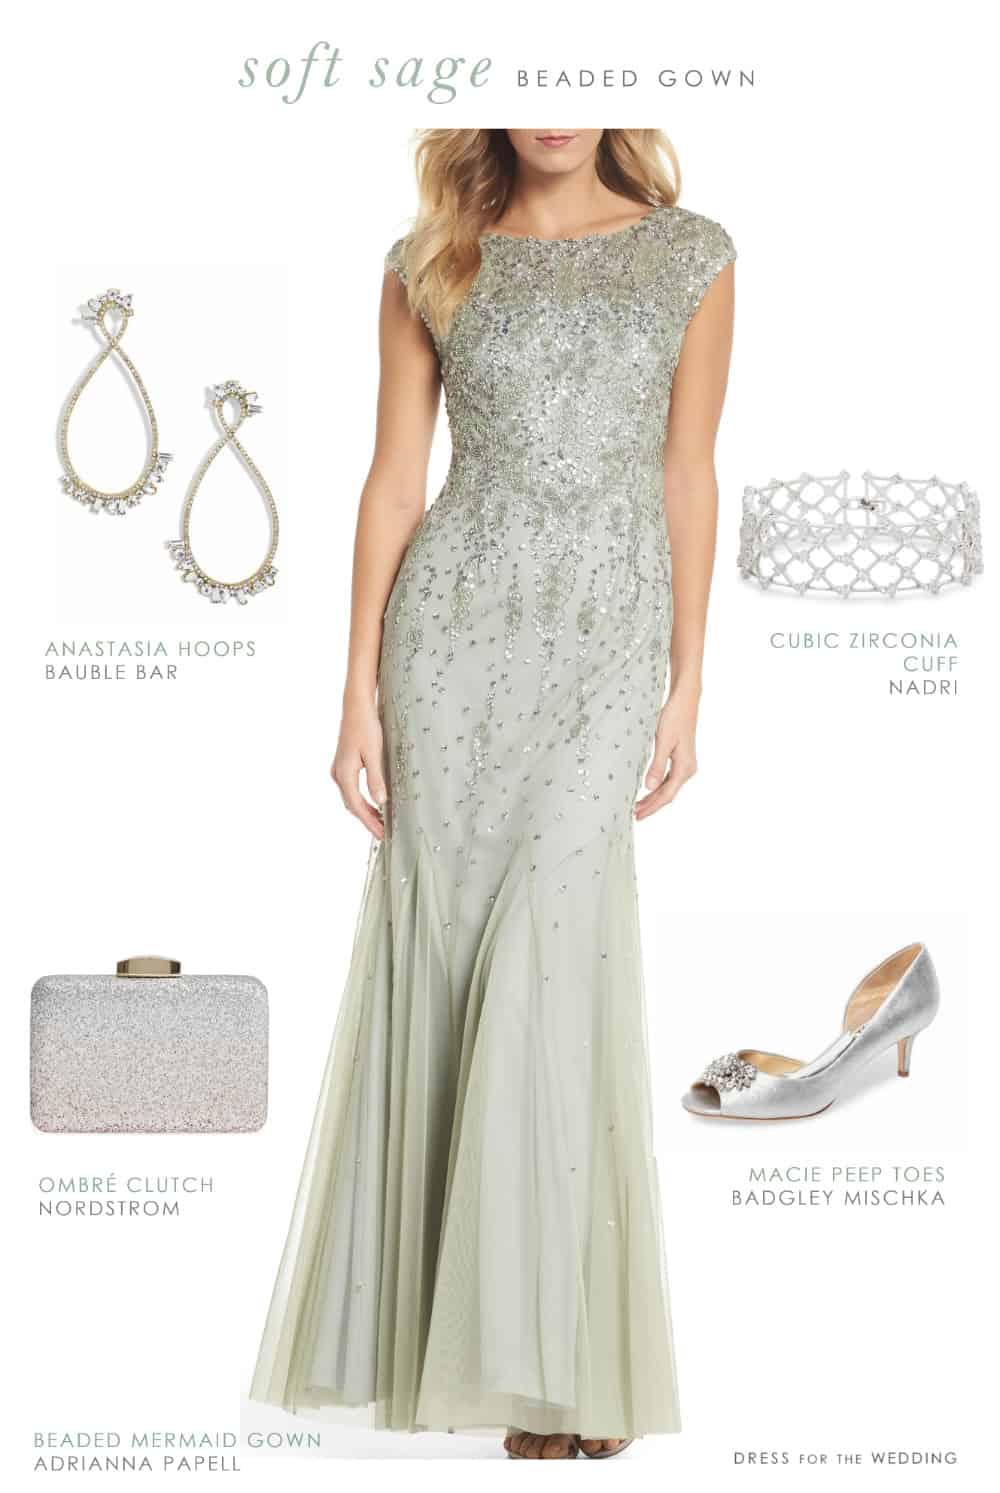 Wedding-Ready Outfits to Snag from the Nordstrom Sale! - Dress for the  Wedding